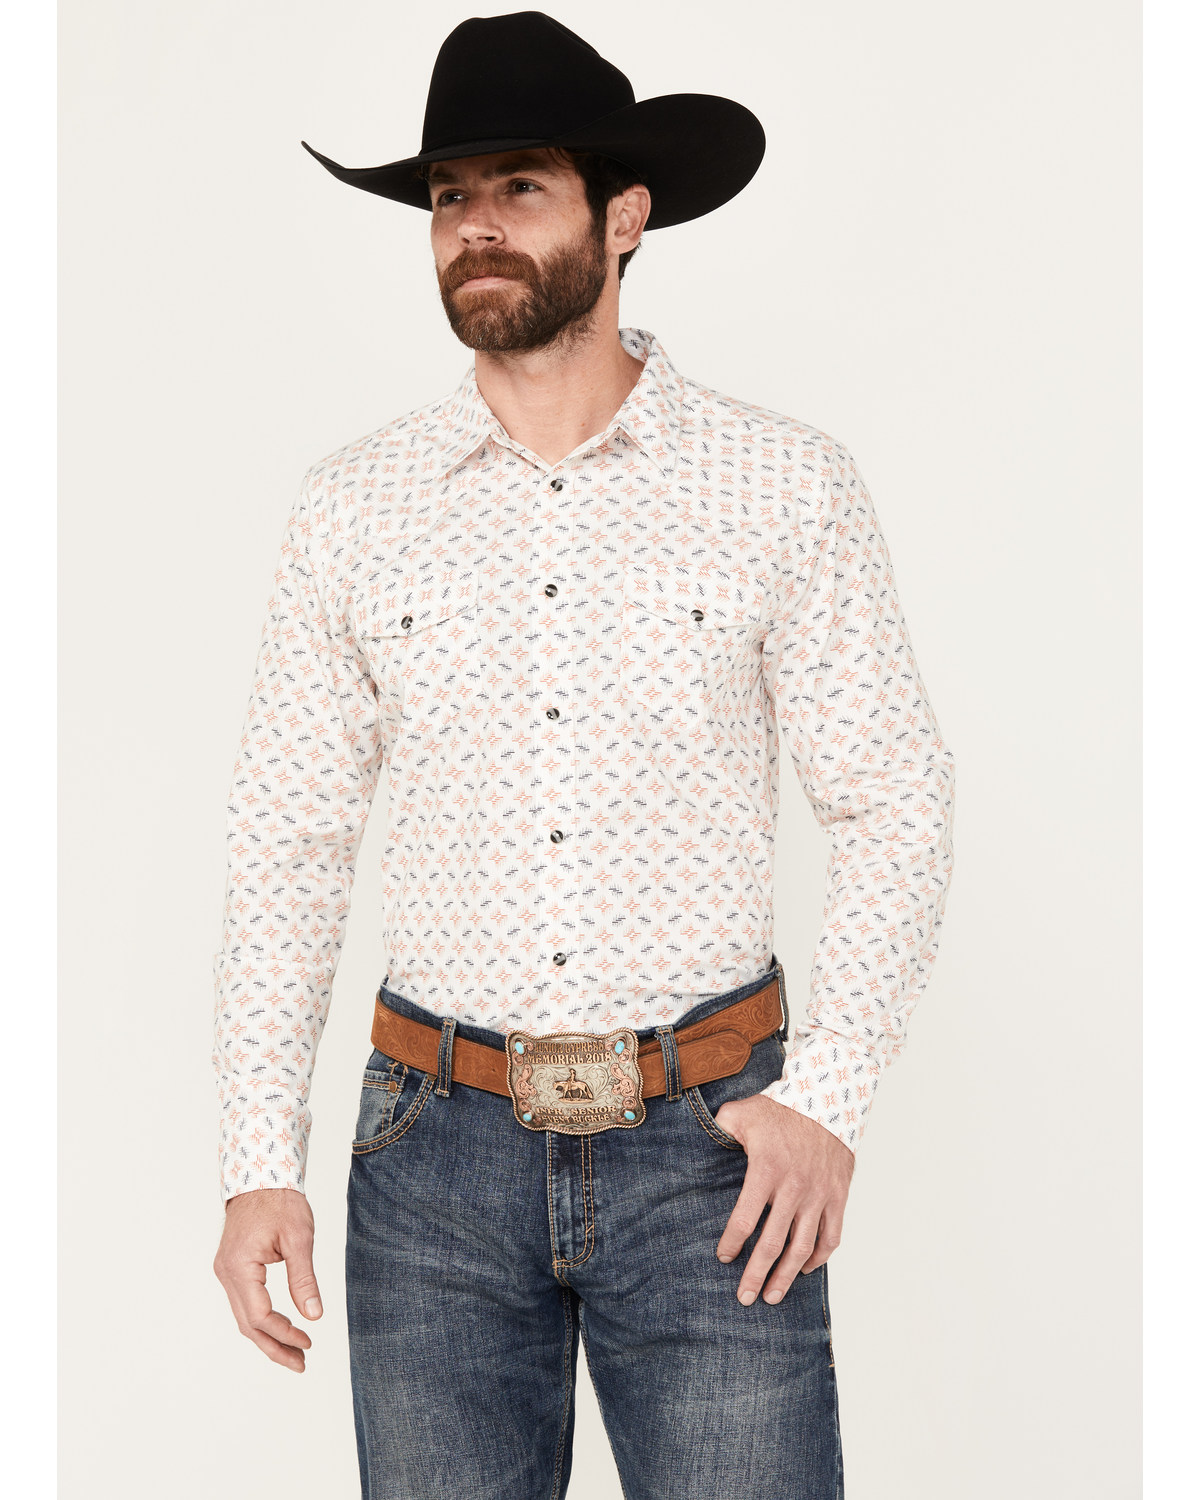 Gibson Trading Co Men's Barbed Wire Geo Print Long Sleeve Western Snap Shirt